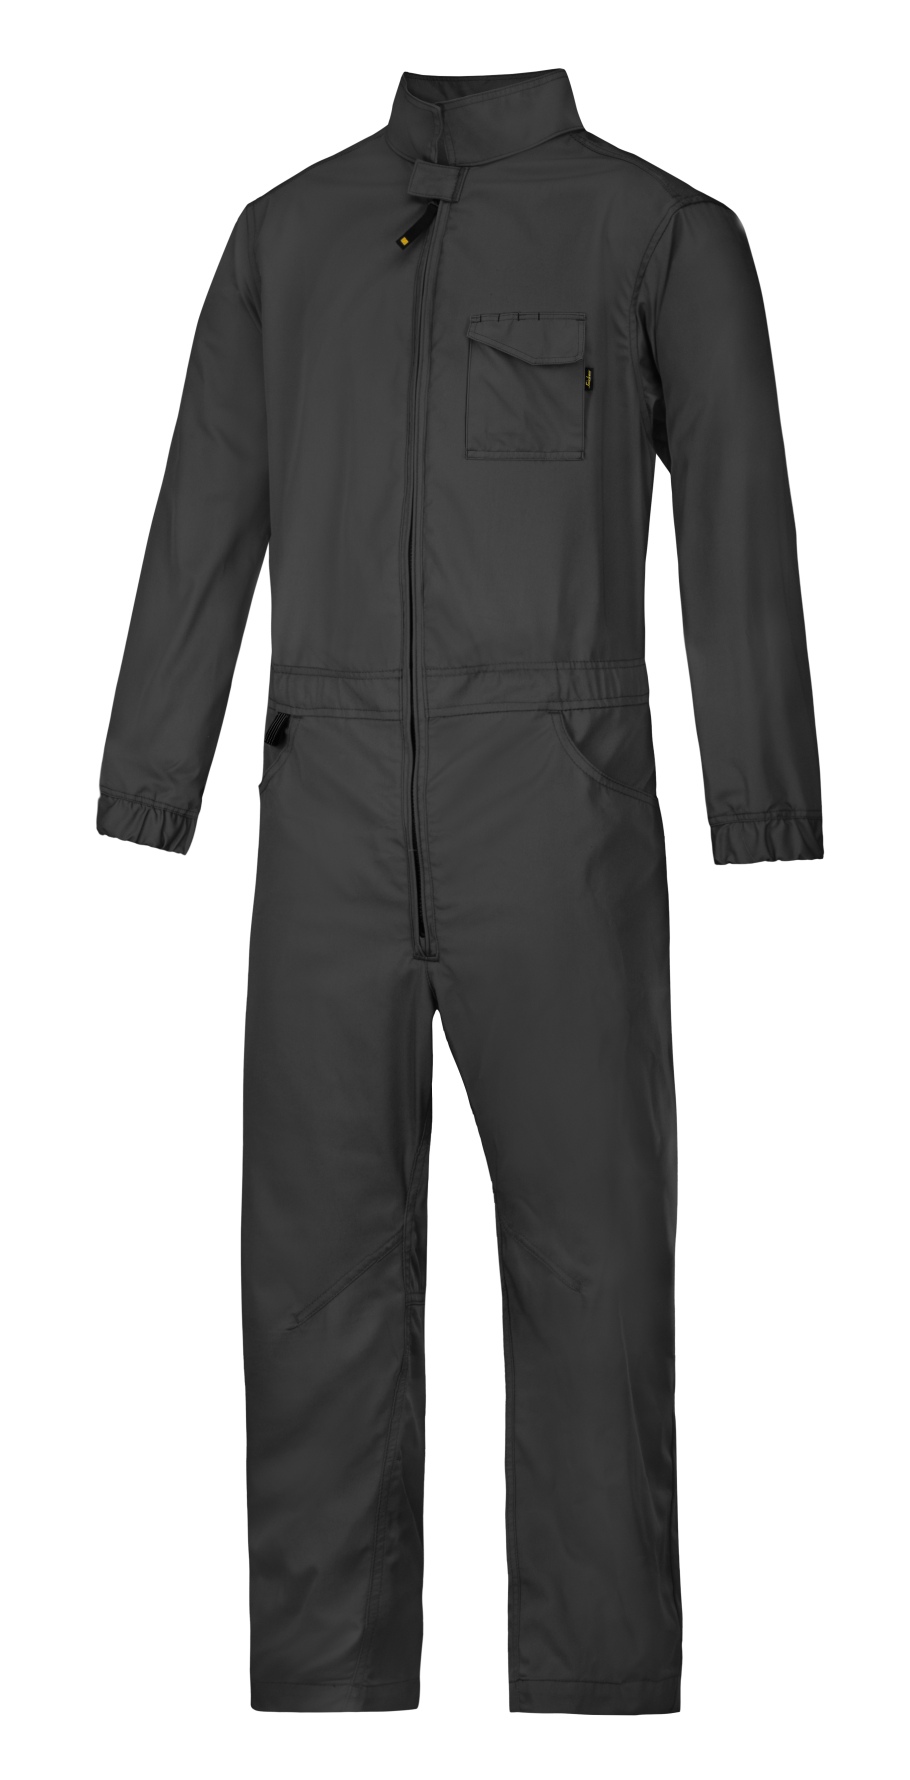 Snickers Workwear 6073 Service Overall